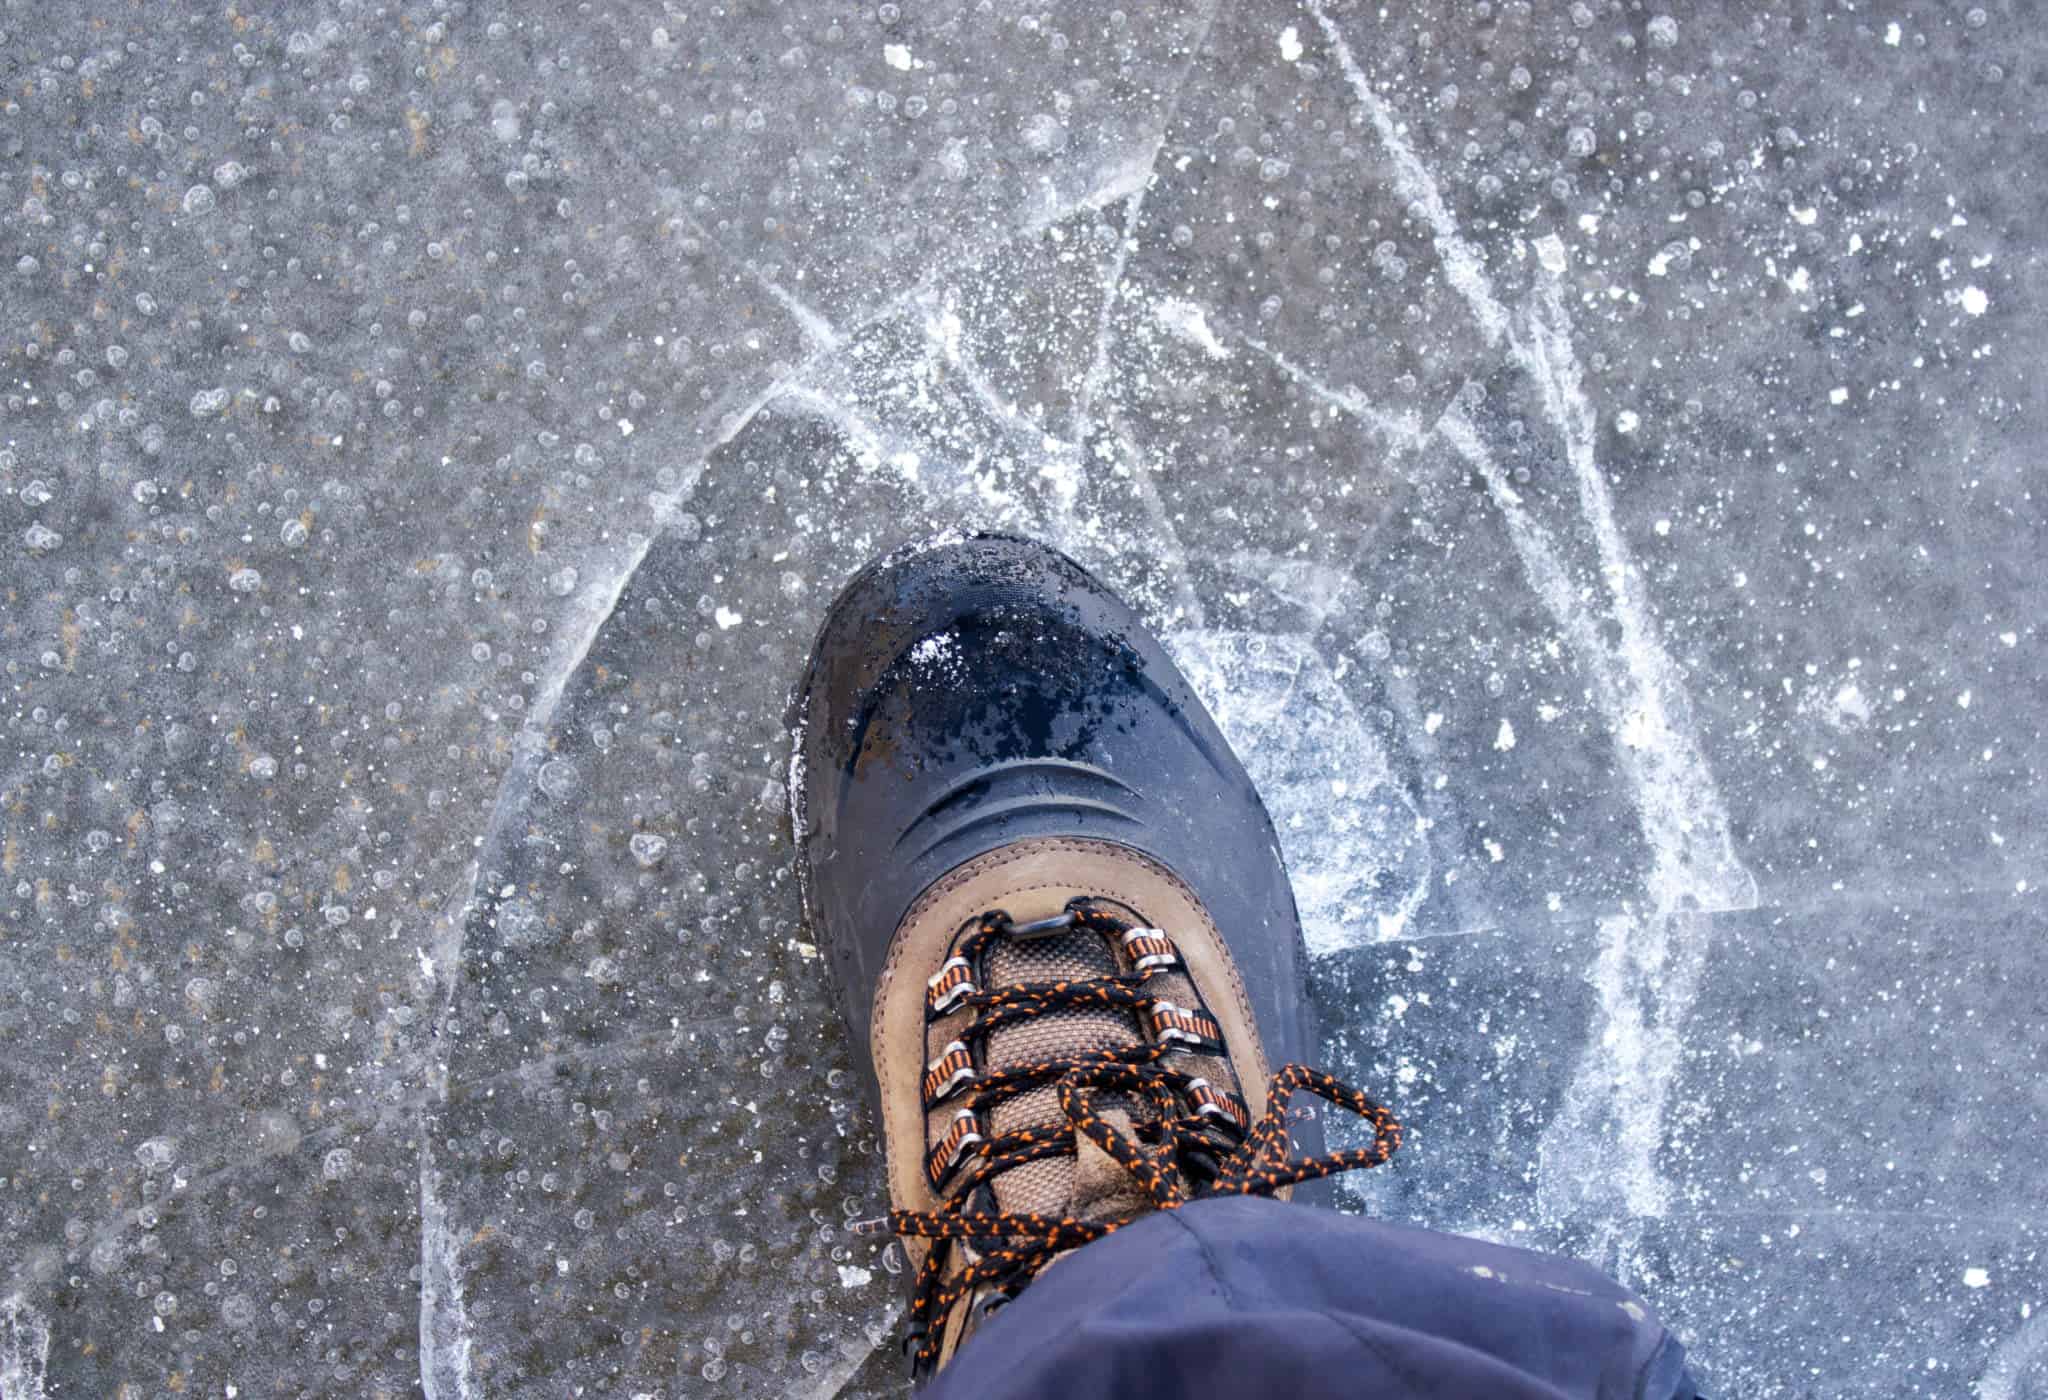 How To Avoid Slipping on Ice?